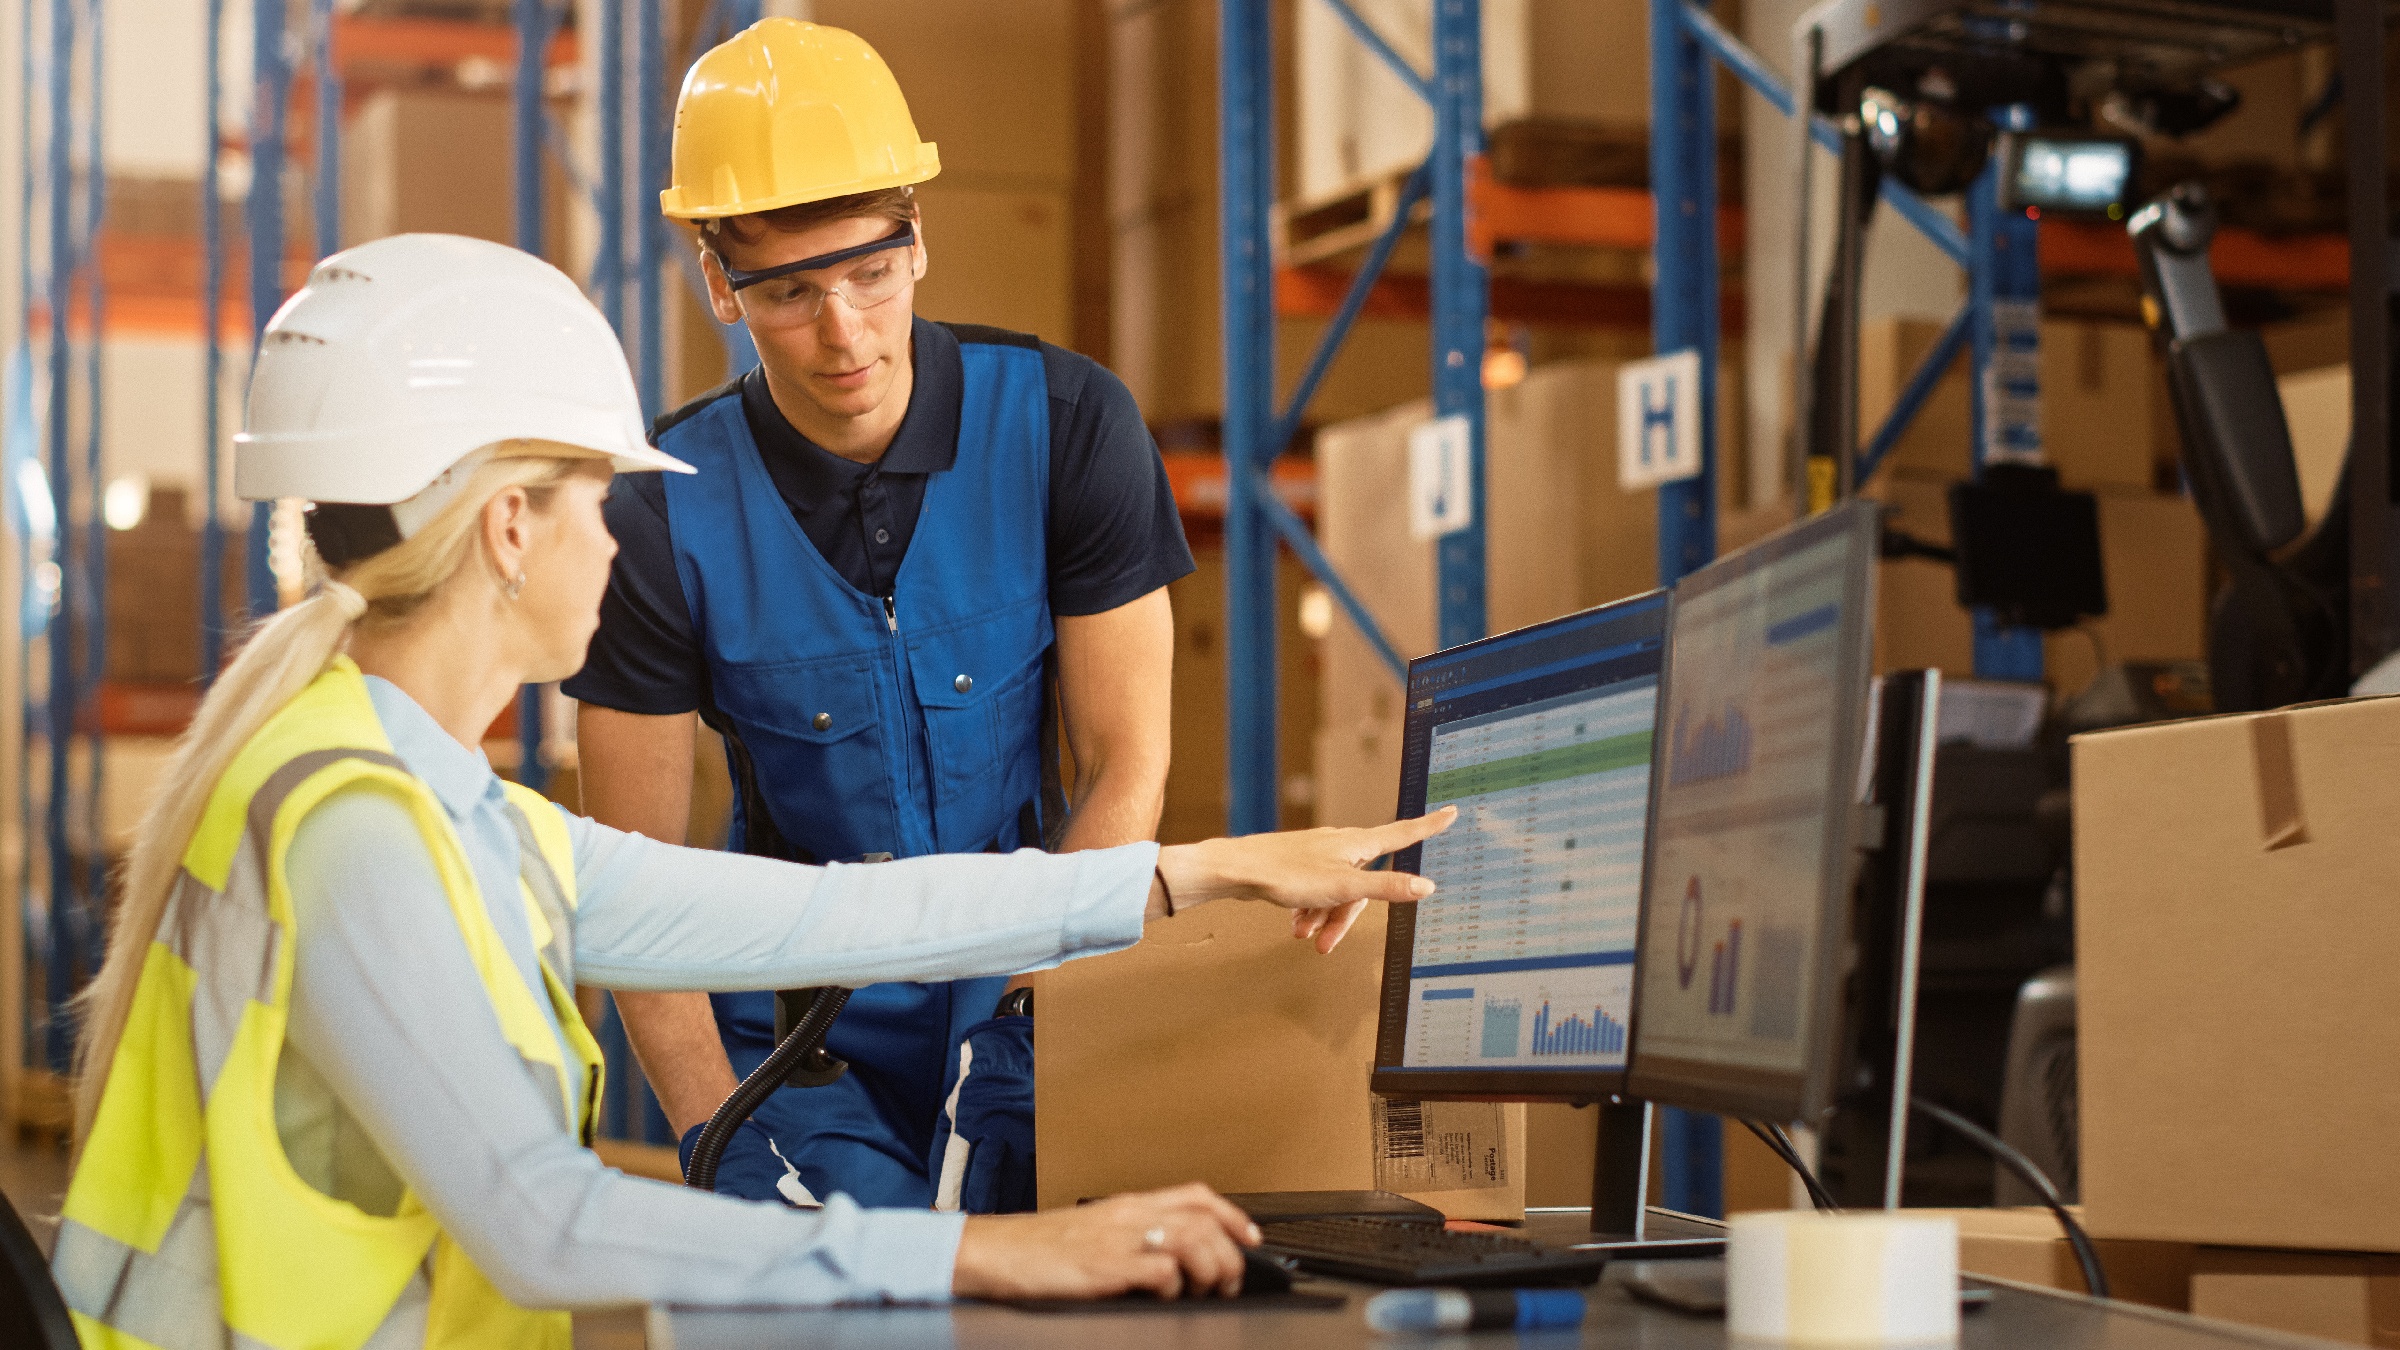 Two warehouse workers discuss operations, viewing ERP and WMS software on a screen in a warehouse.